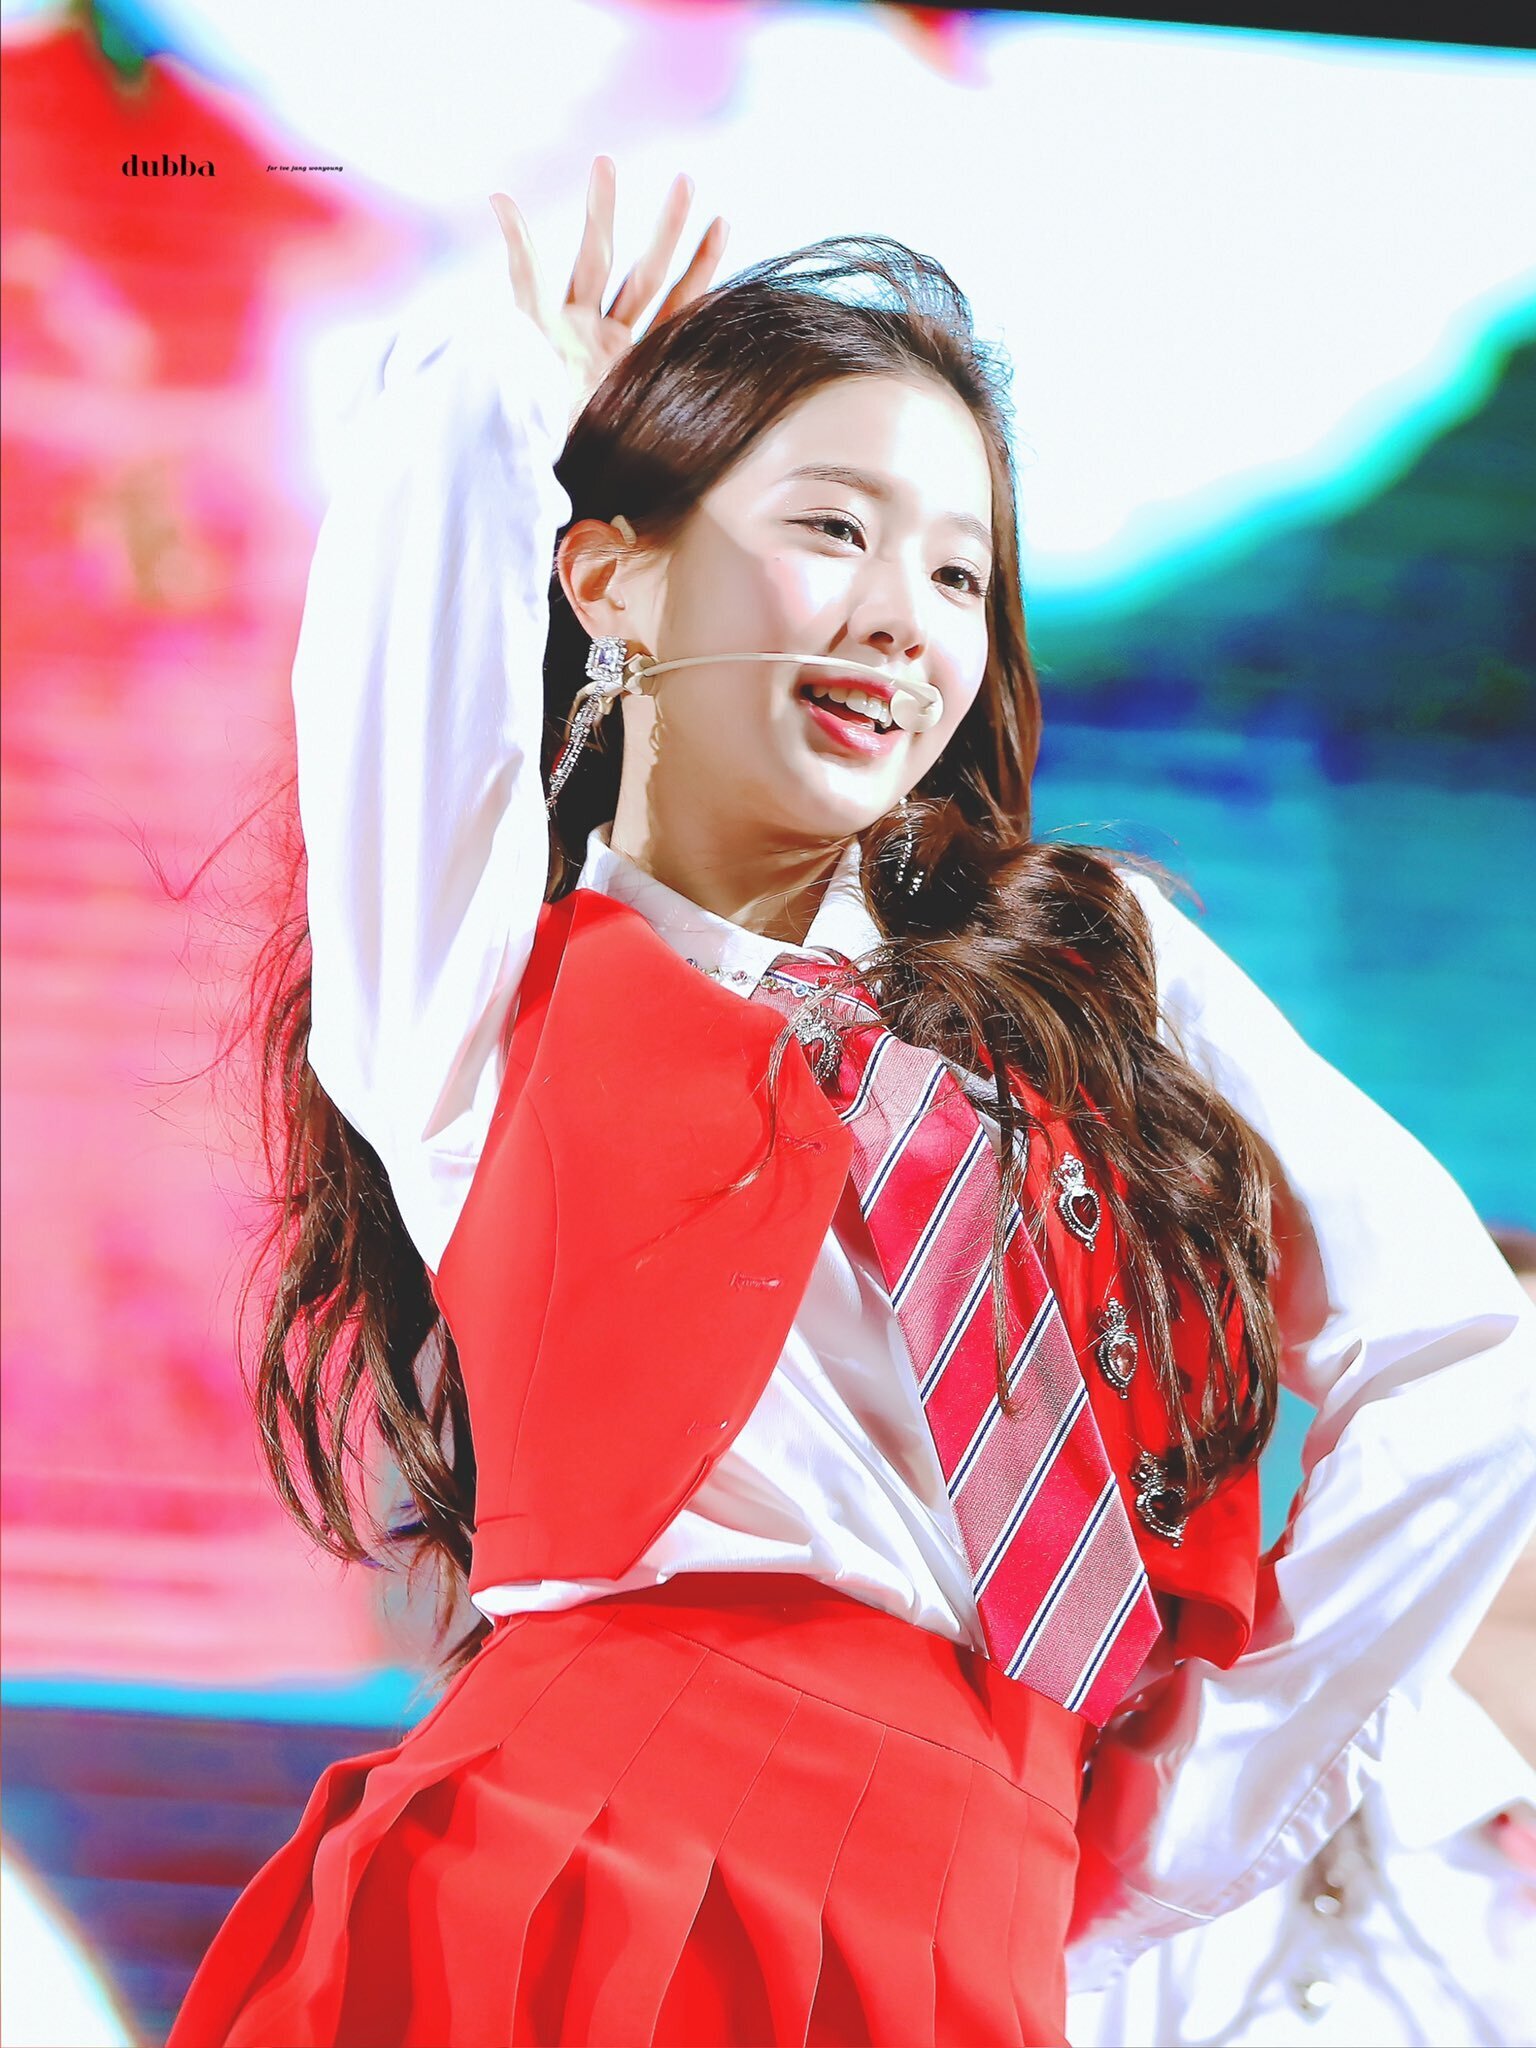 220518 IVE's Wonyoung at Keimyung University Festival | kpopping